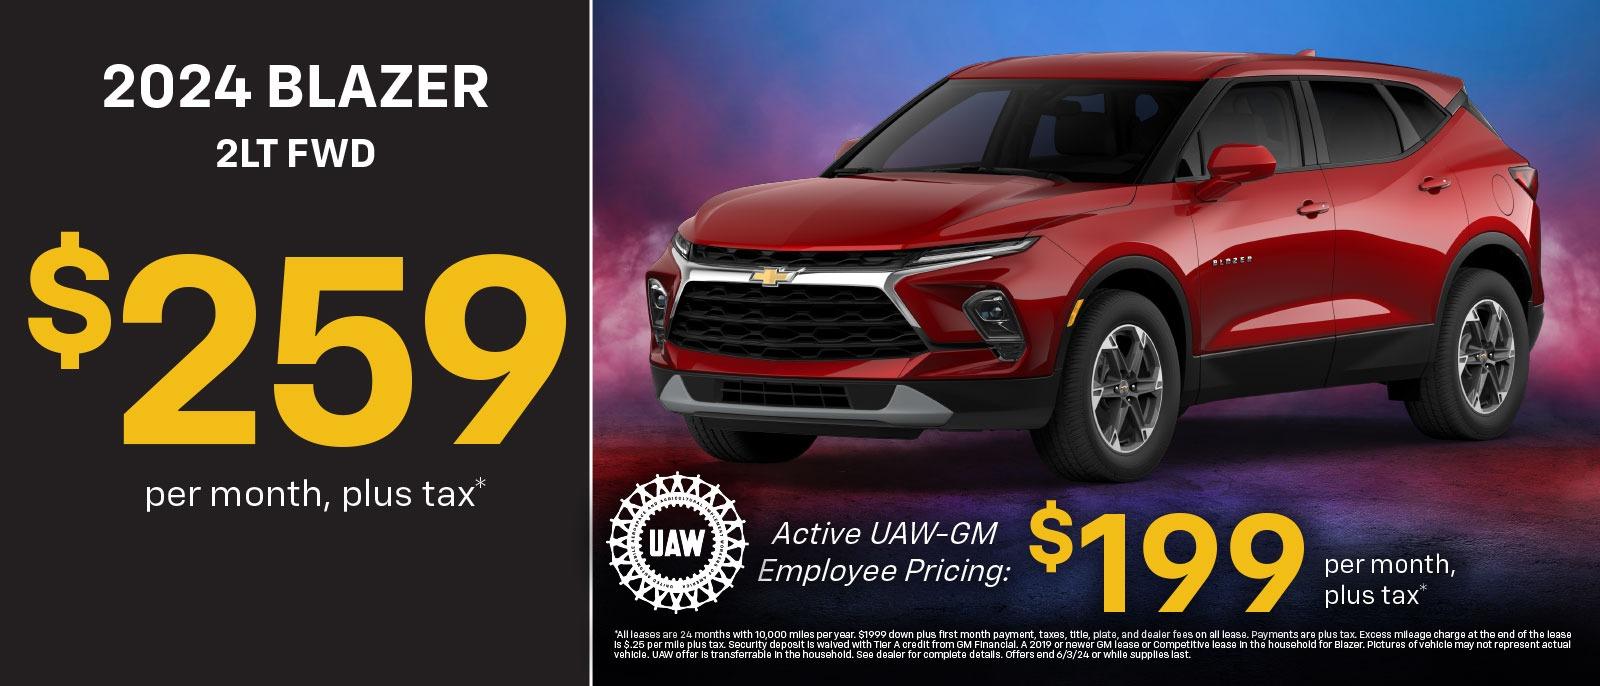 2024 Blazer 2LT FWD
$259 per month, plus tax*
Active UAW-GM Employee Pricing: $199 per month plus tax*